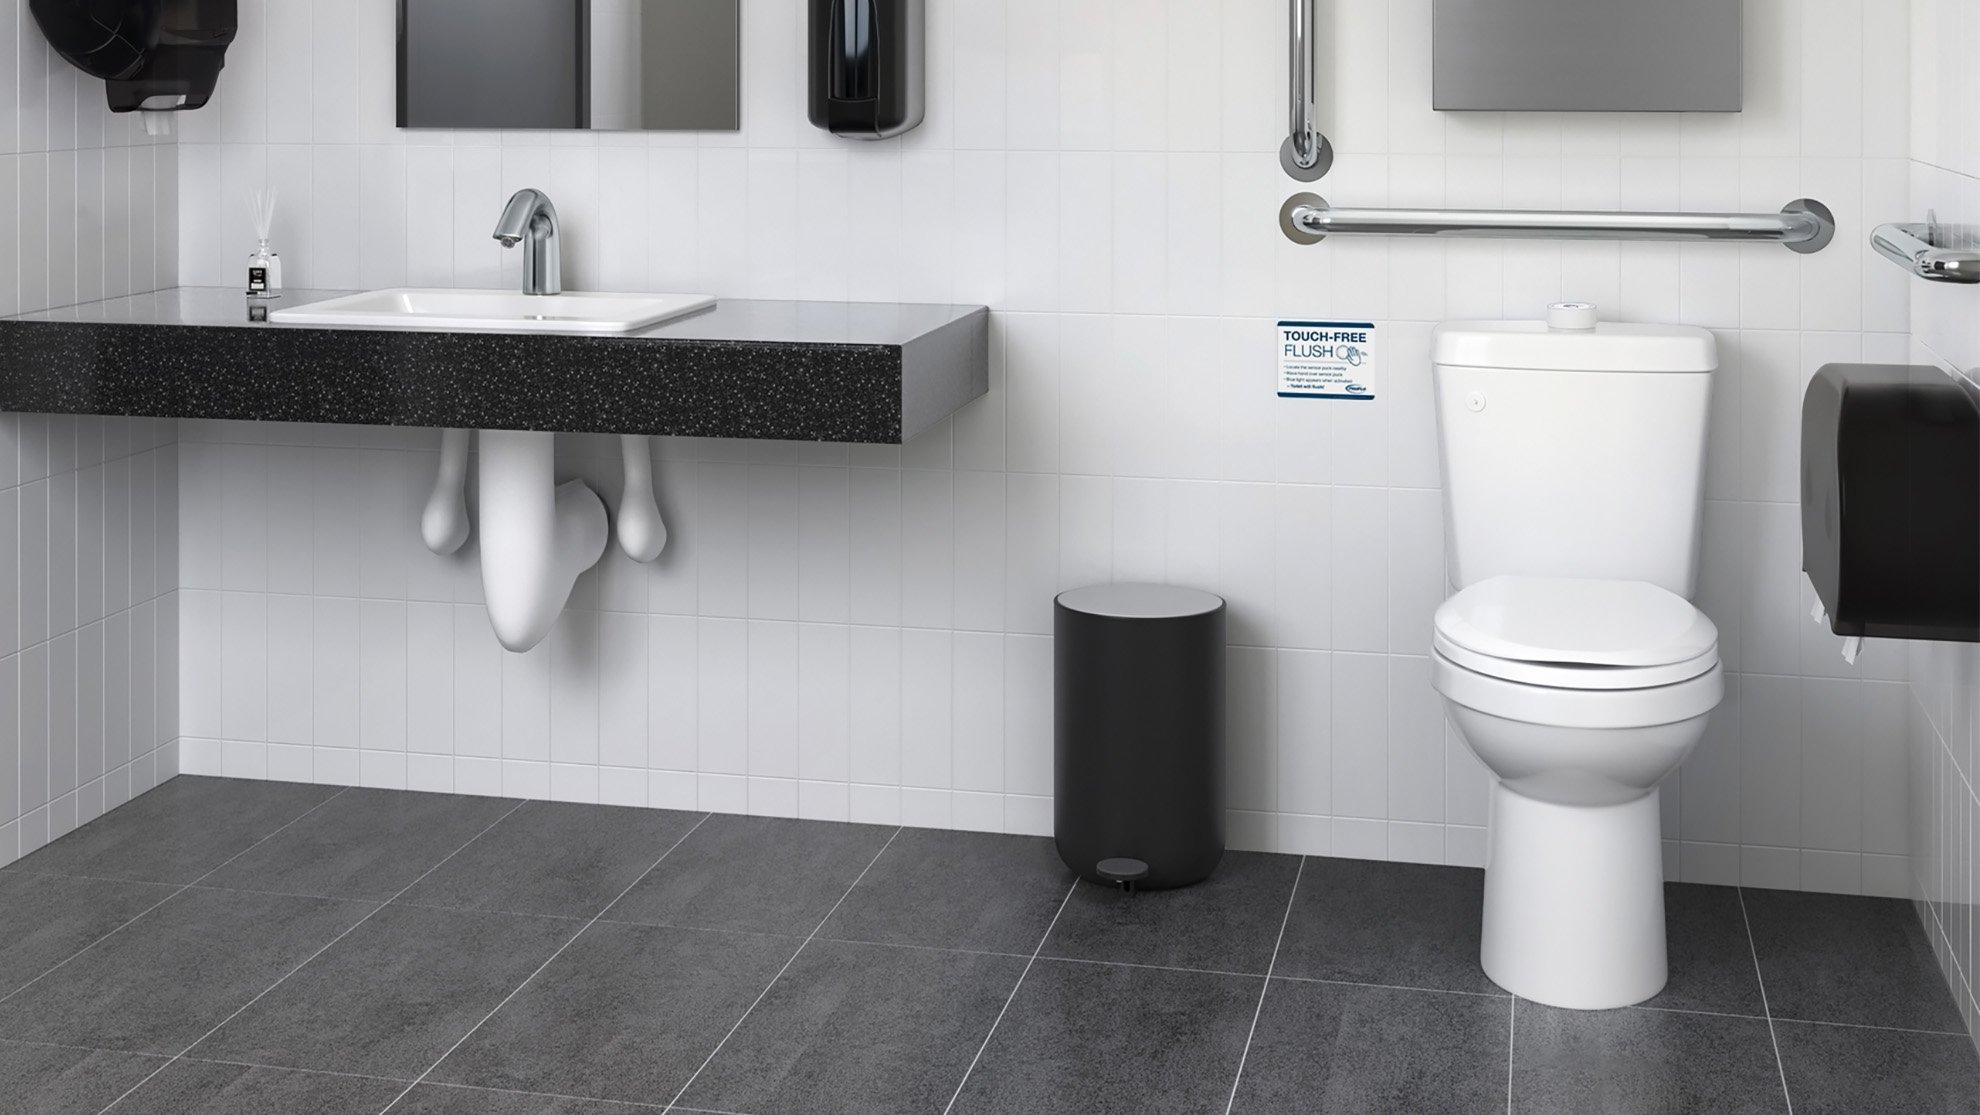 A commercial ADA-compliant single-user restroom, with grab bars, automatic soap and paper towel dispenser, and touchless faucet.